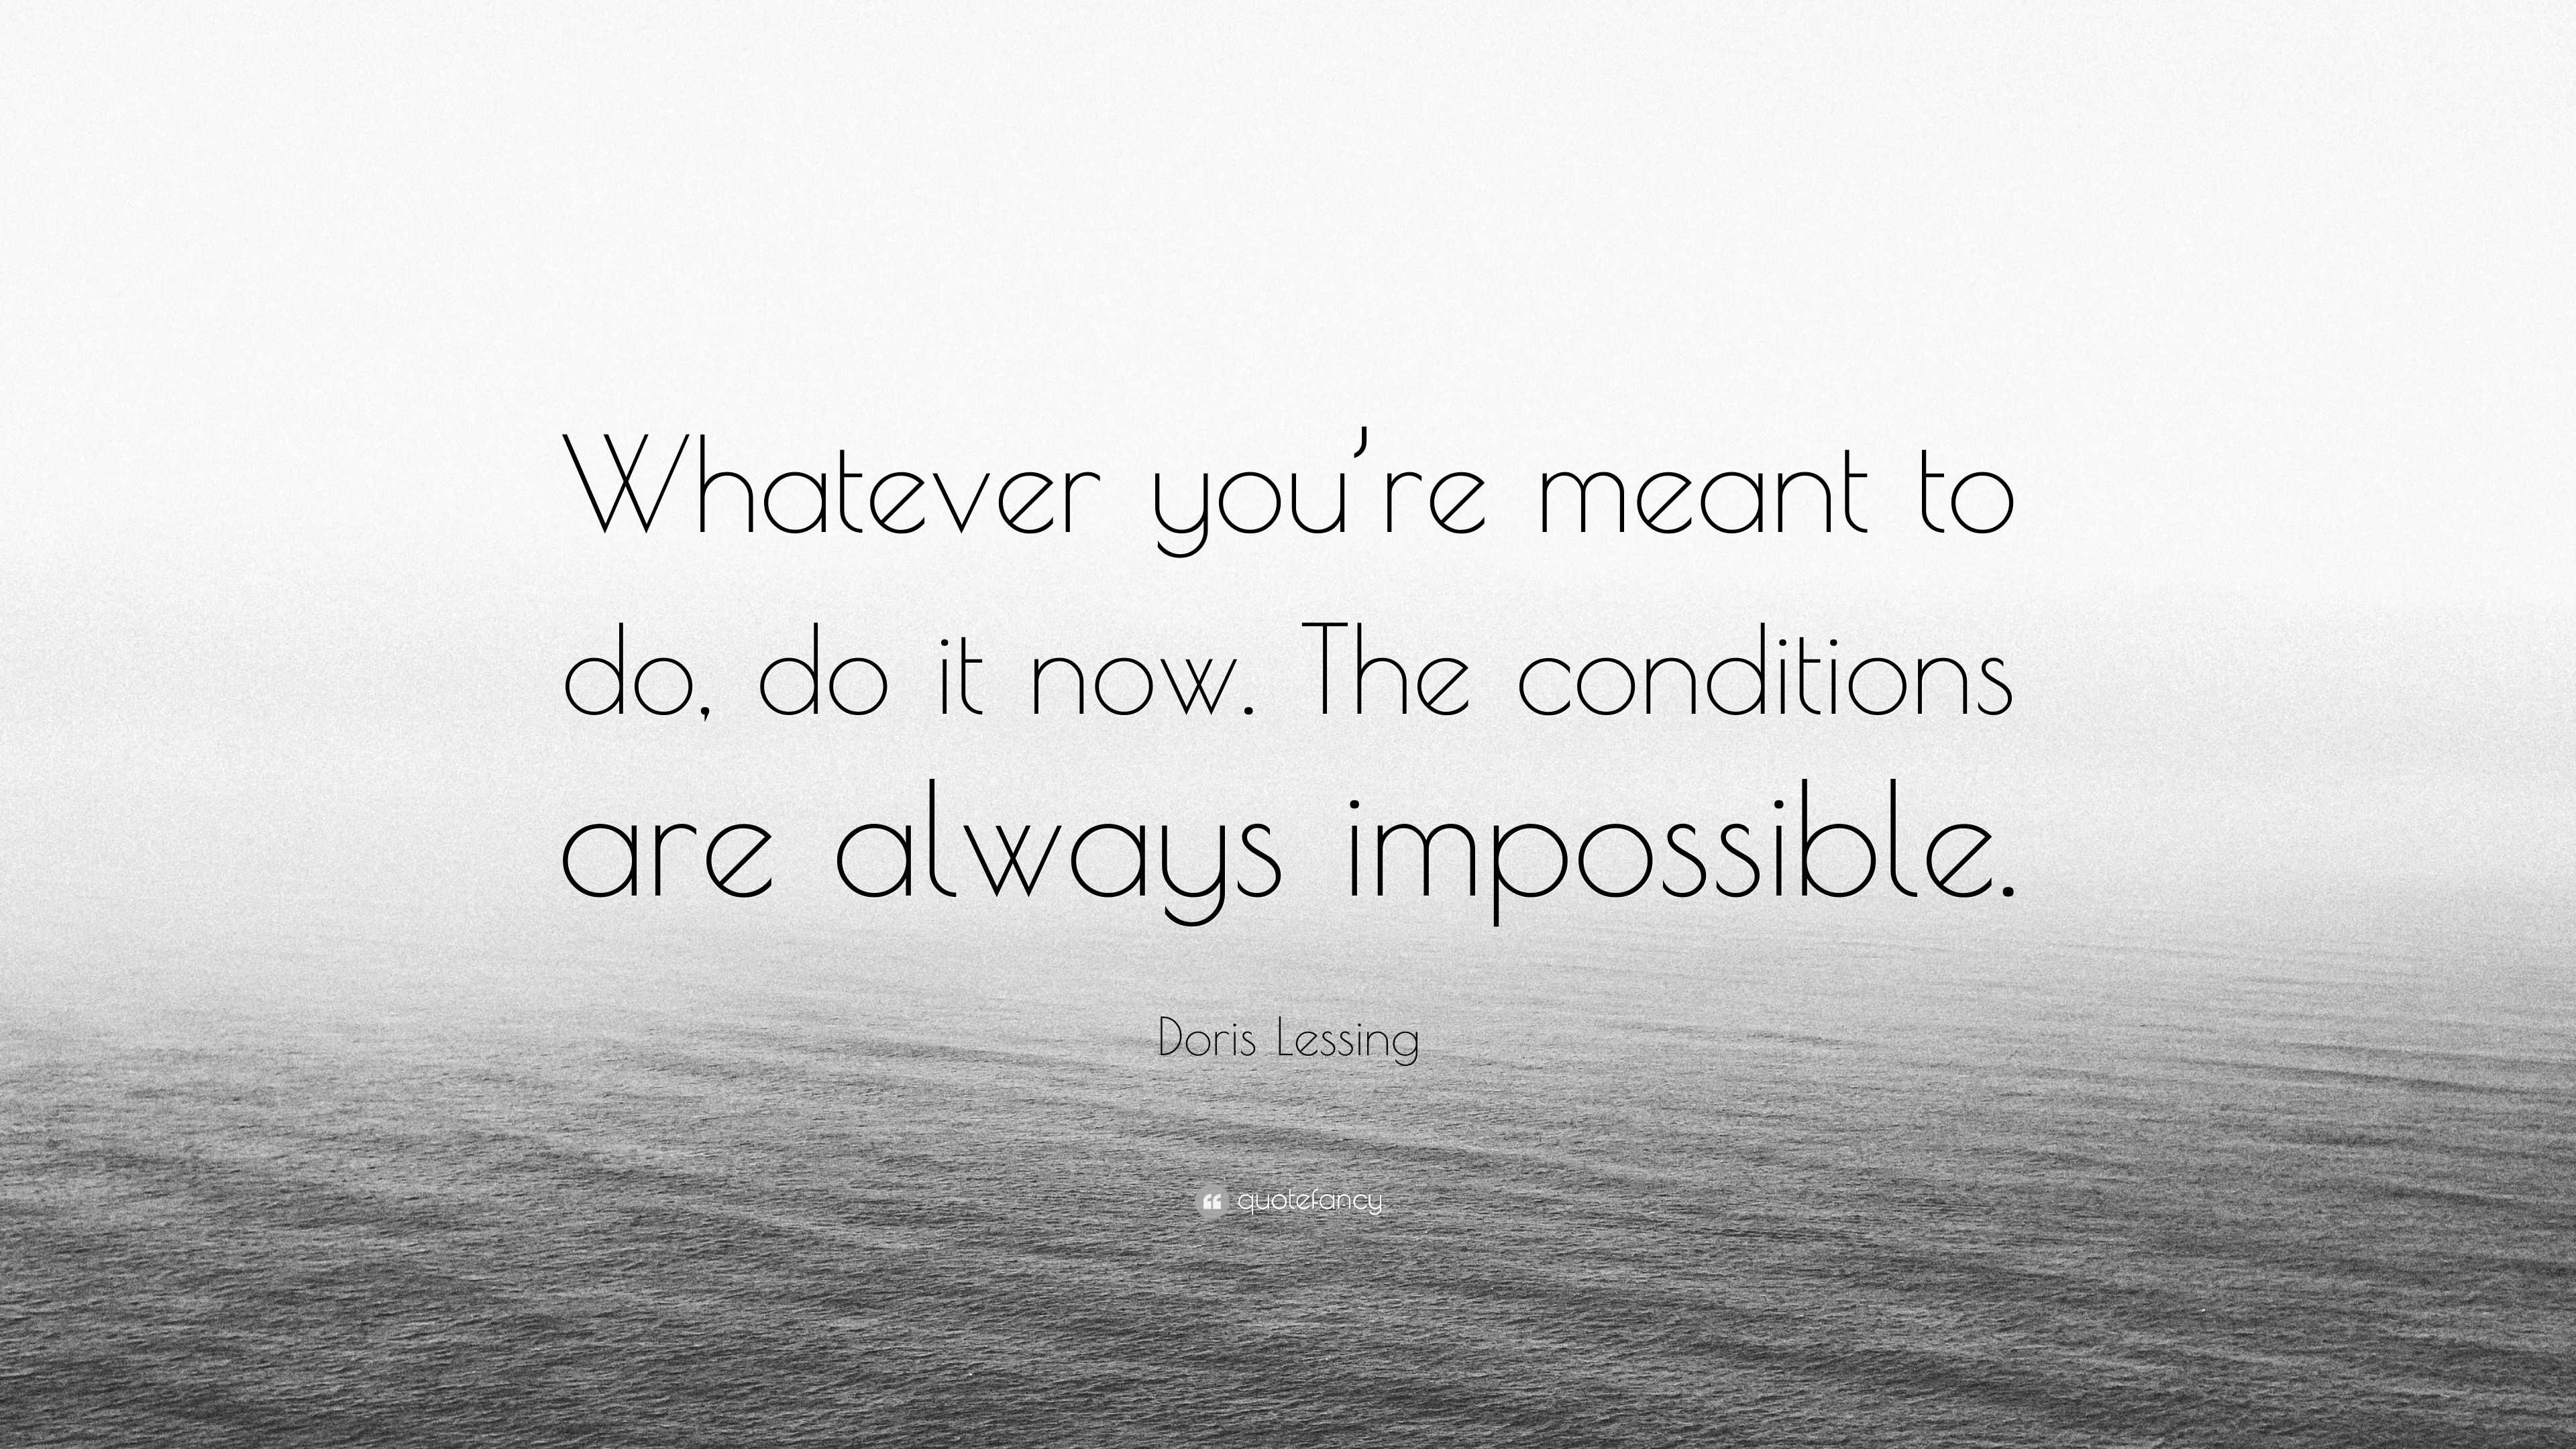 Doris Lessing Quote: “Whatever you’re meant to do, do it now. The ...